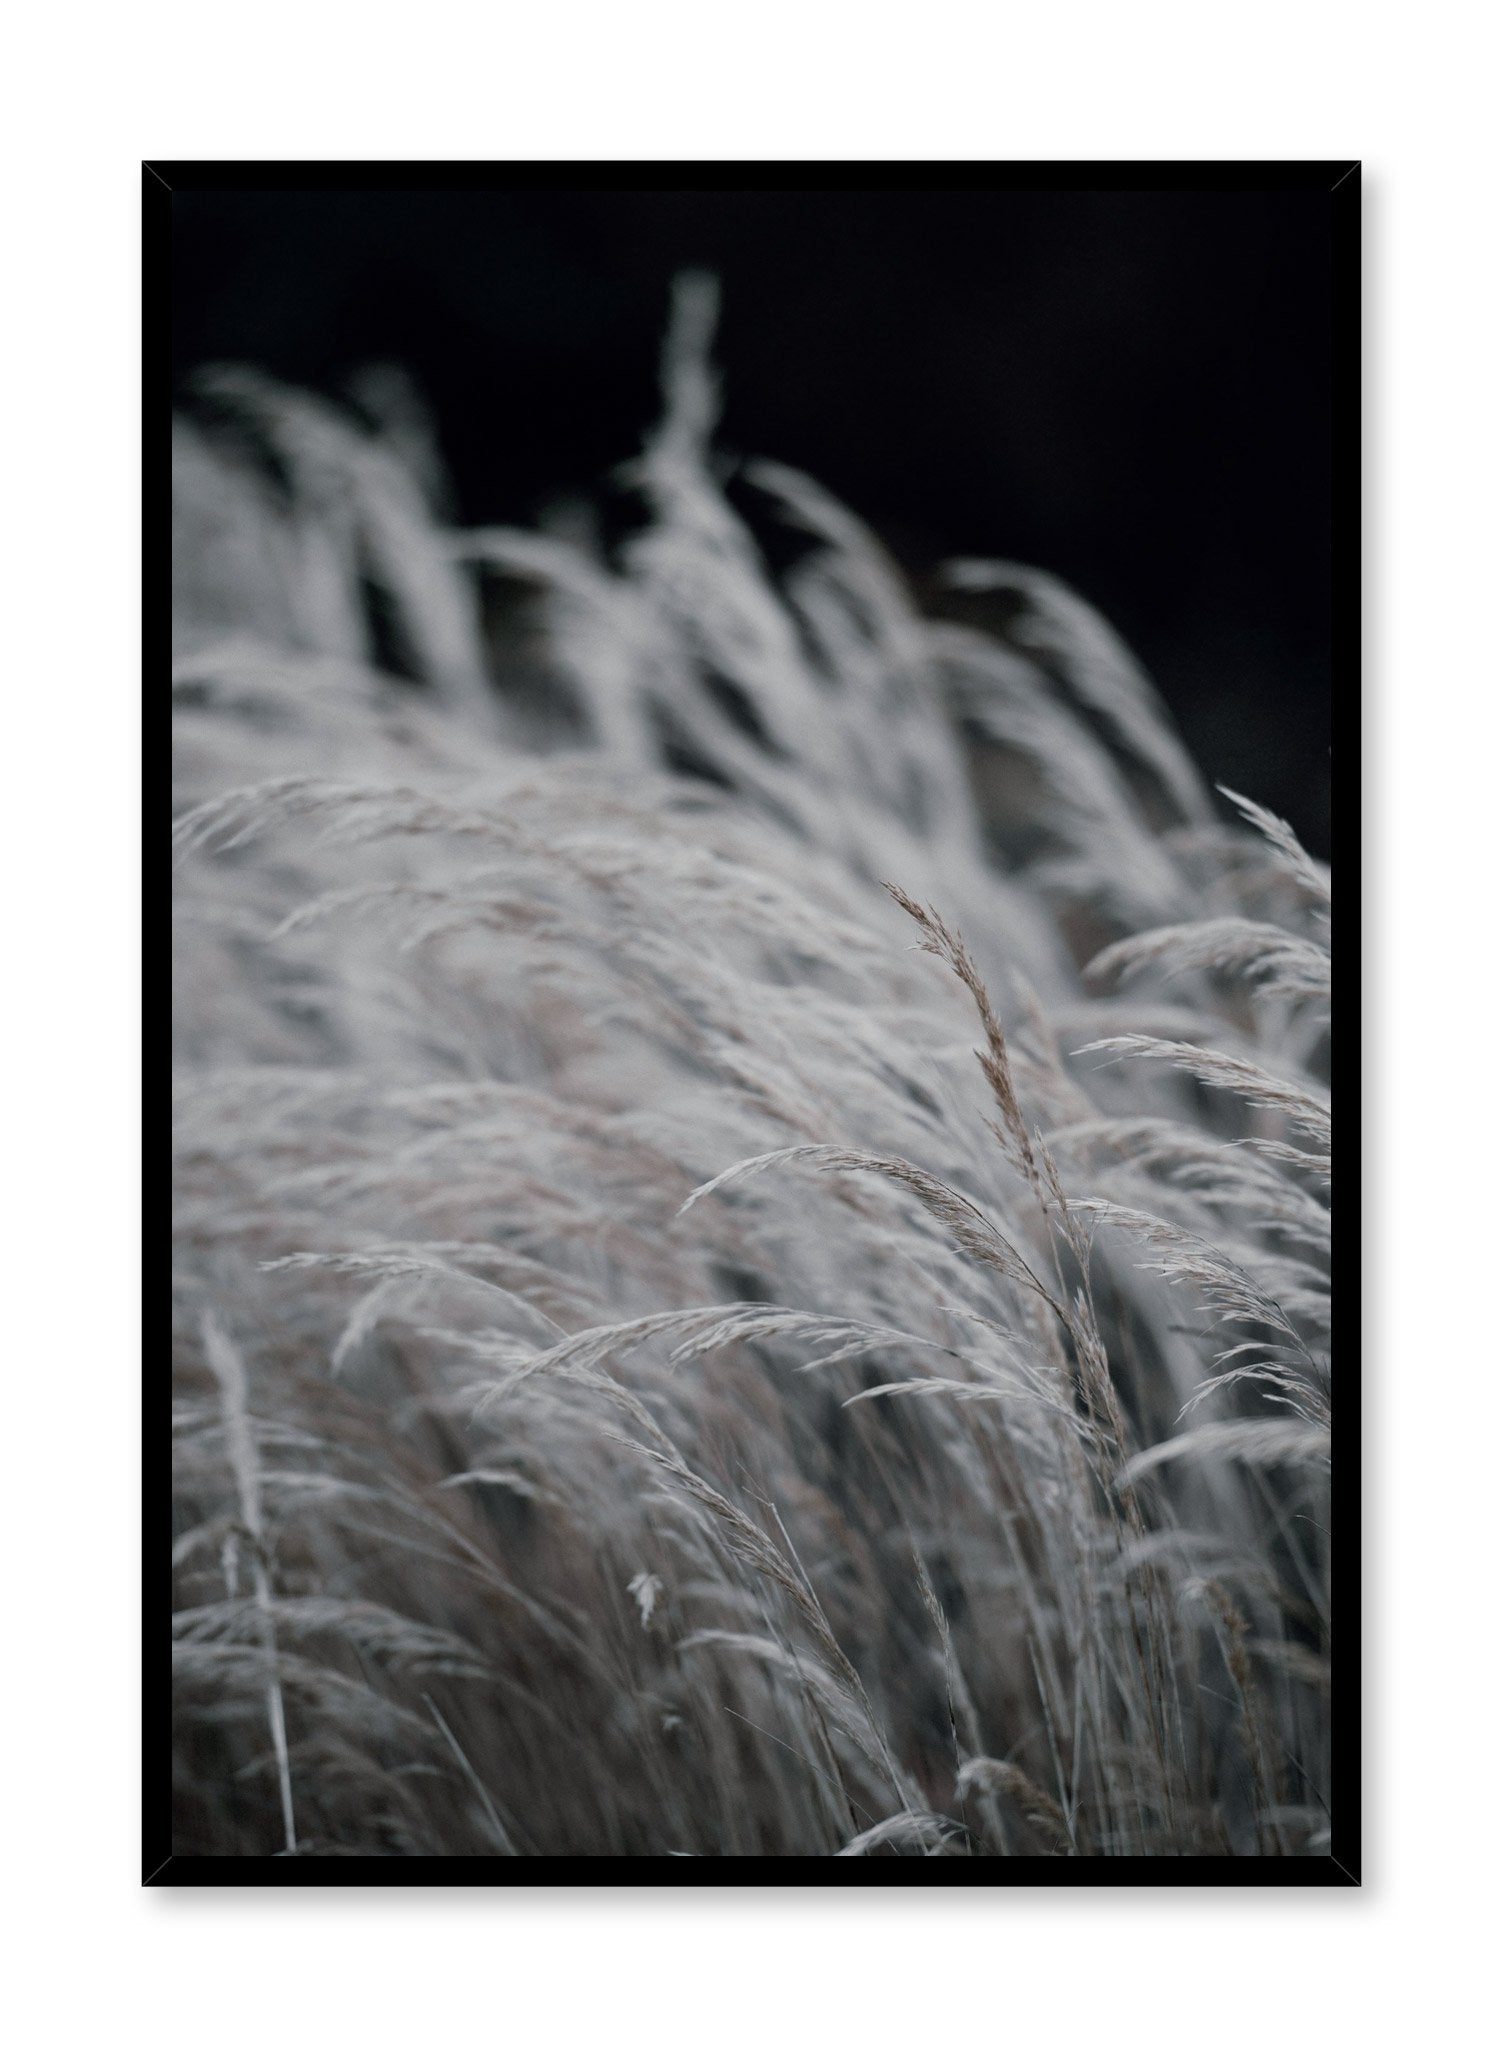 "Wintry Prairie" is a botanical photography poster by Opposite Wall of cool toned wispy grasses in the dark of night.